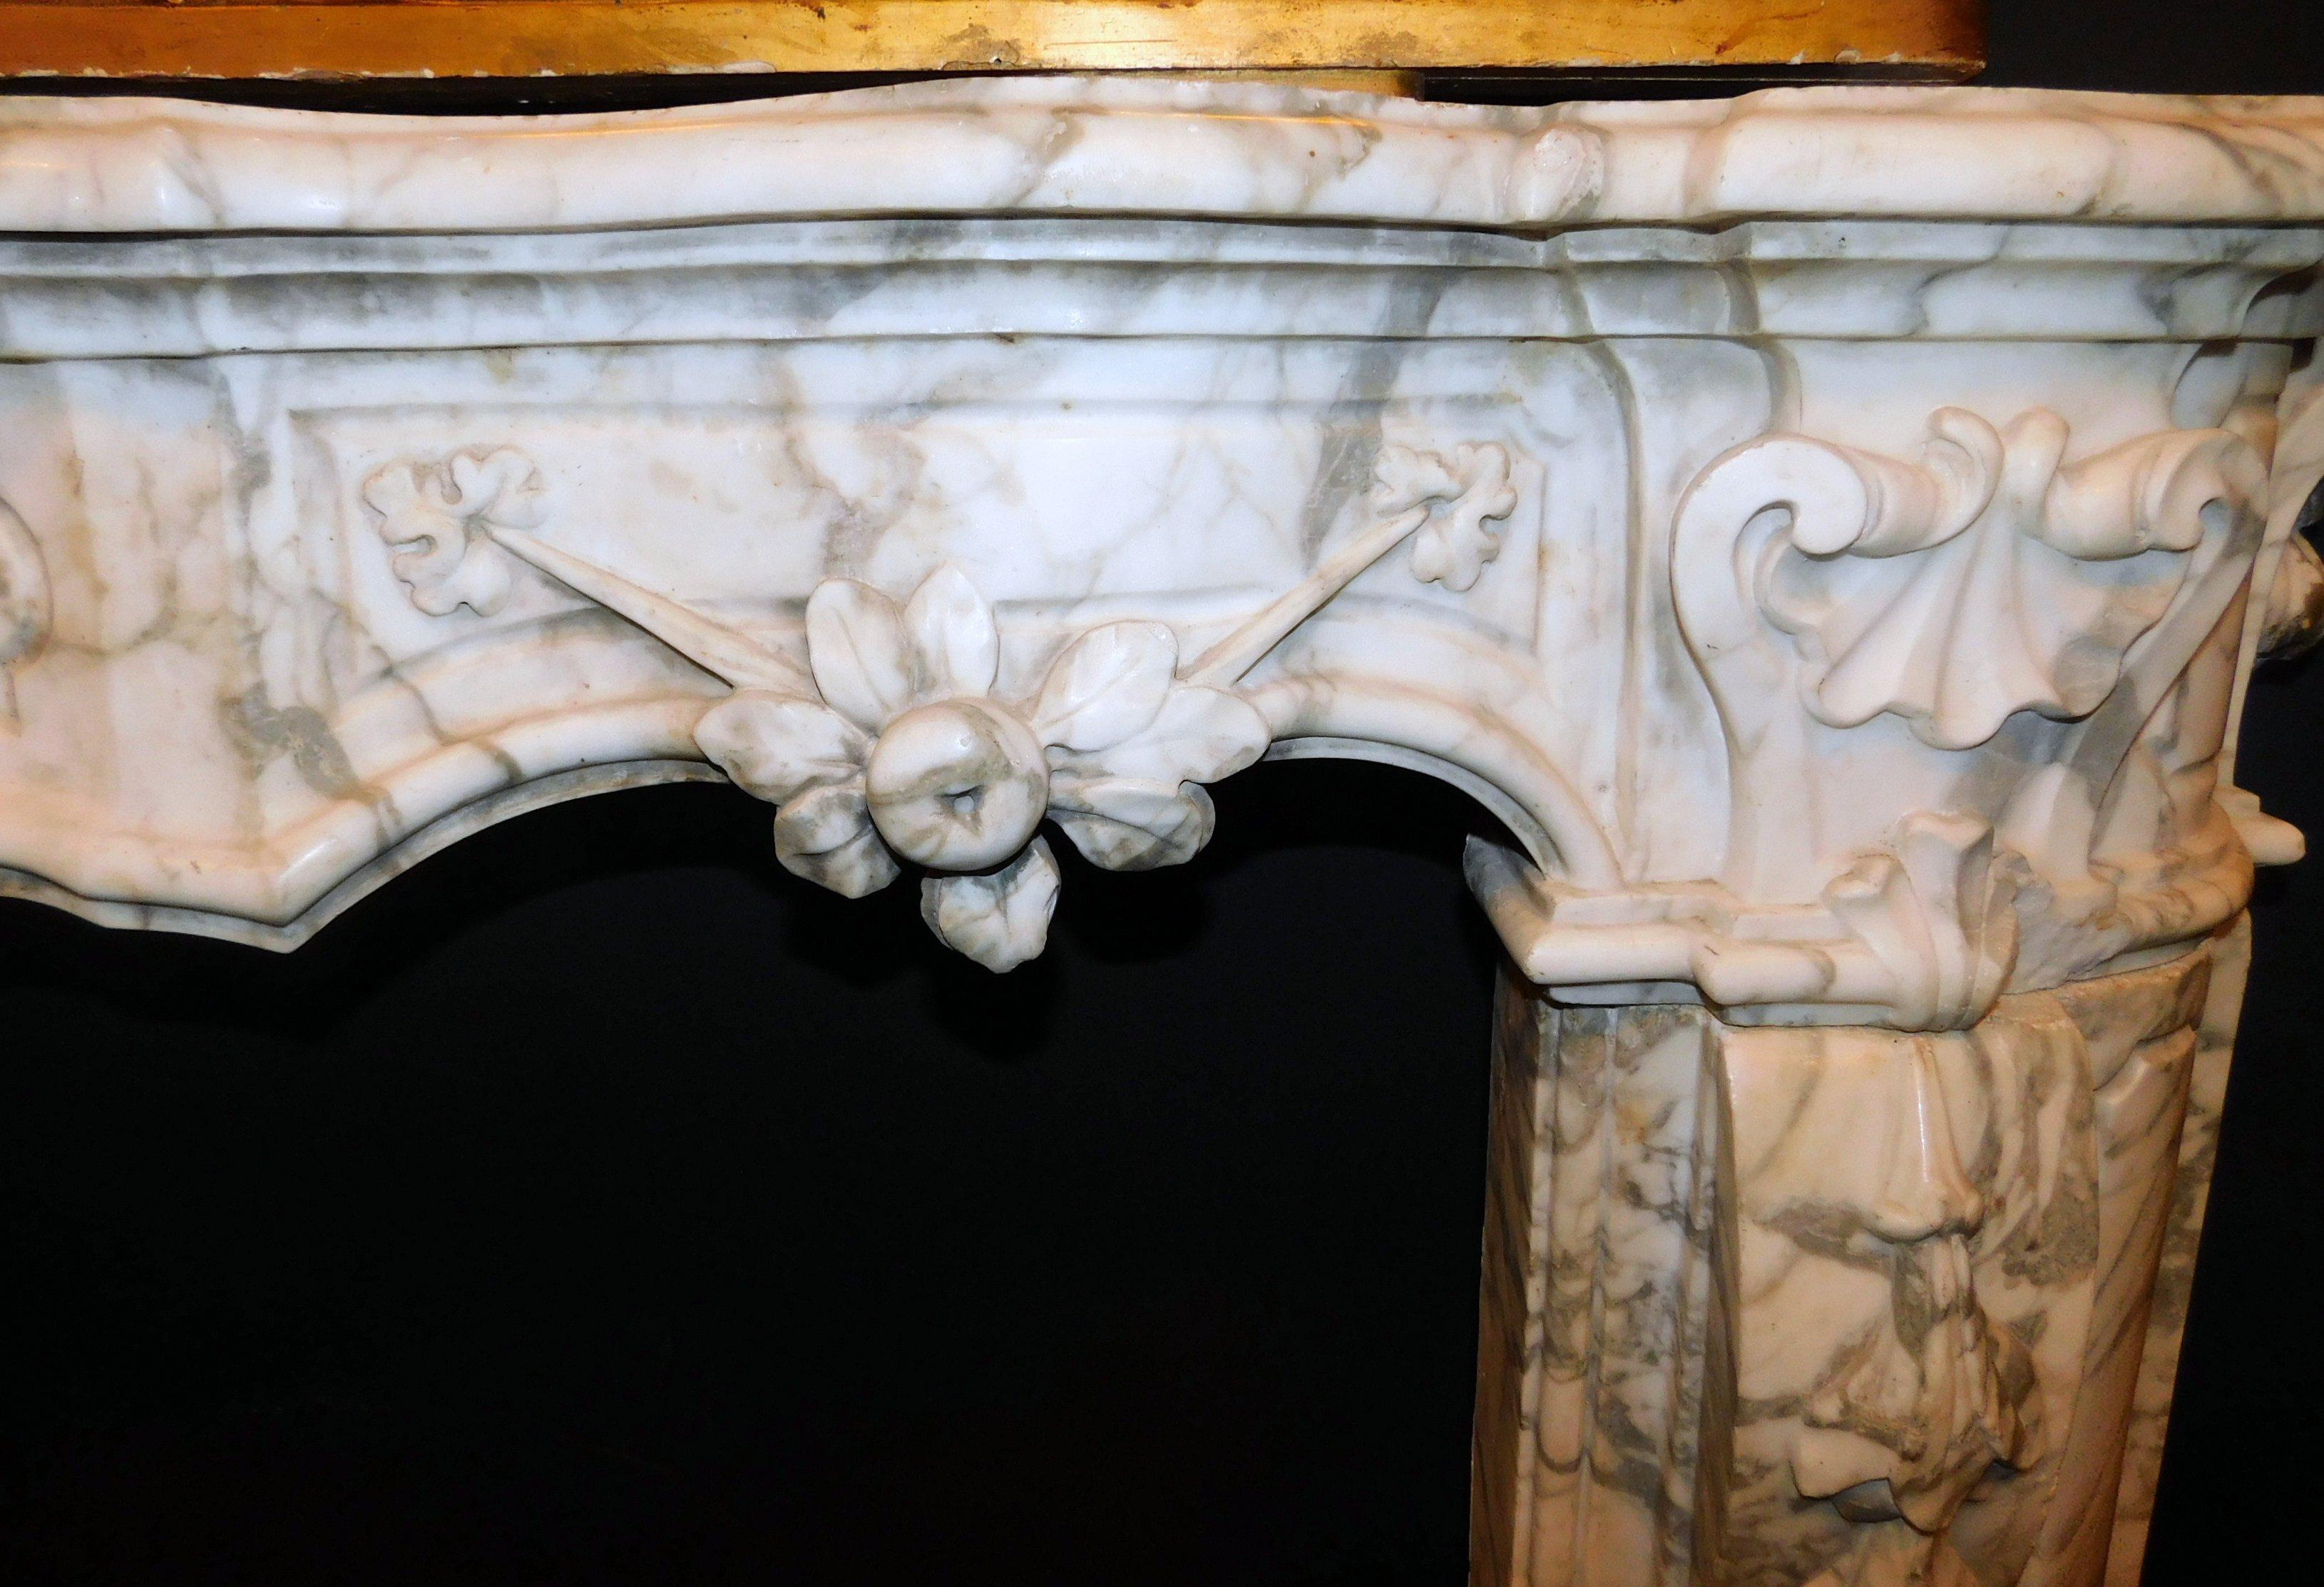 Carrara Marble Antique White Marble Fireplace with Mask and Friezes, 18th Century, Italy For Sale